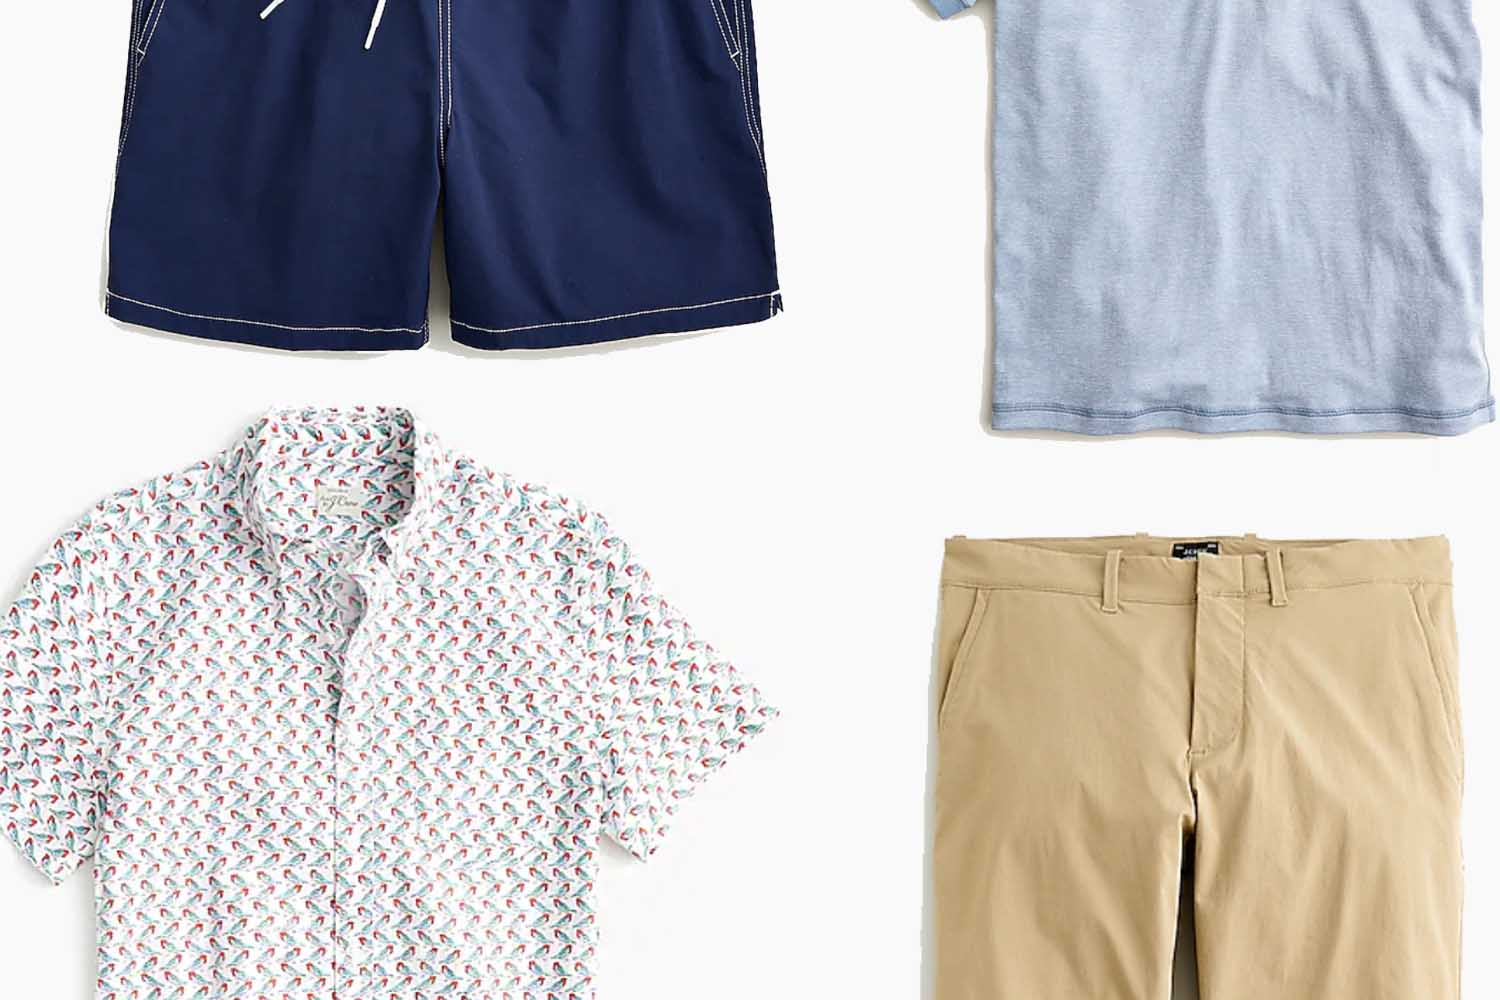 Deal: Save Up to 70% During J.Crew's Prime Time Event